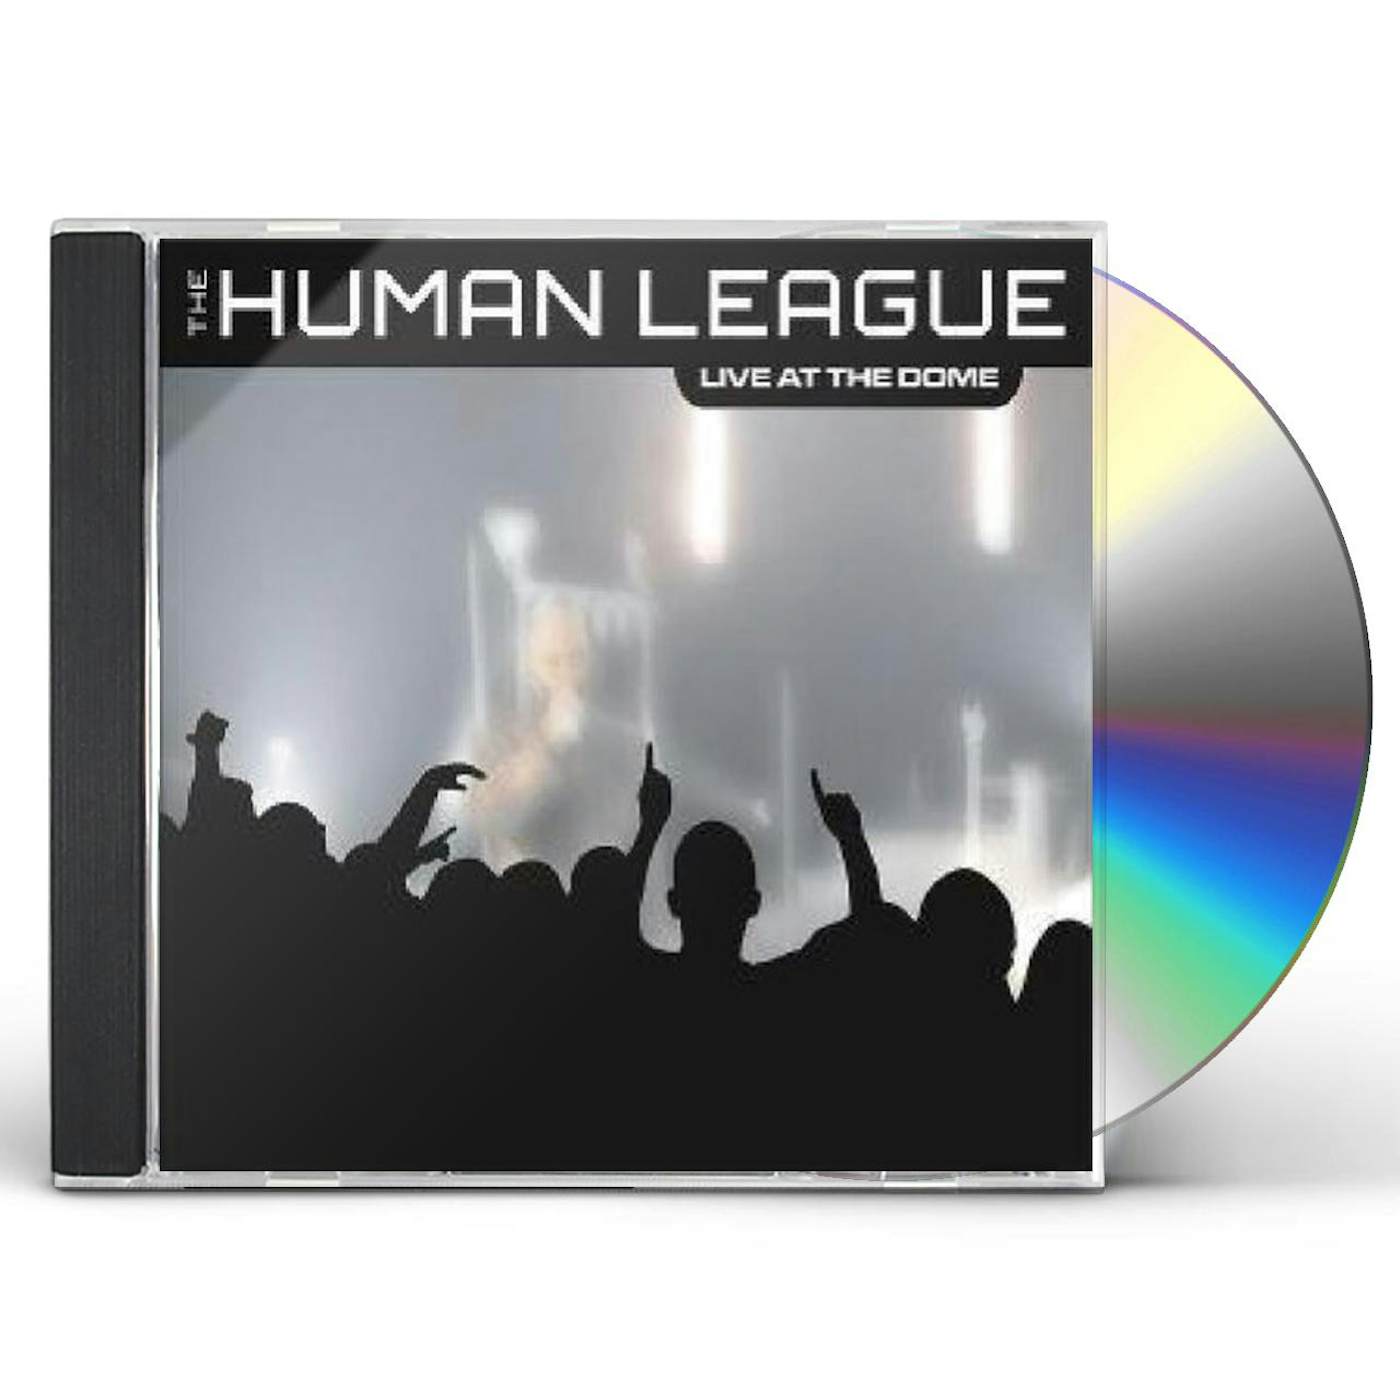 The Human League LIVE AT THE DOME CD